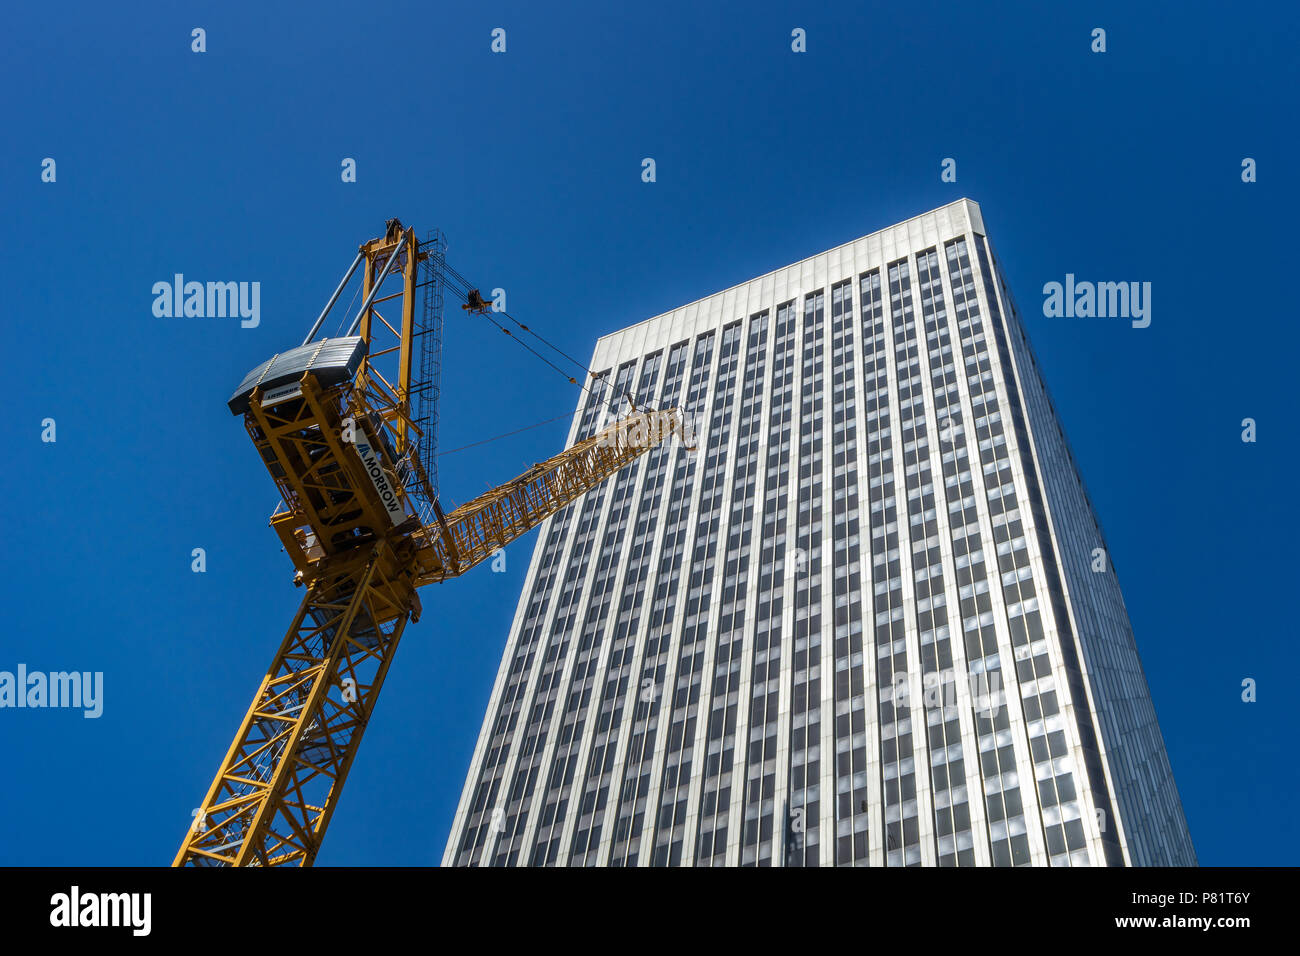 Looking up at a crane in front of the Rainier Tower. Construction site of the Rainier square tower, Seattle, WA. Illustrative construction photograph. Stock Photo